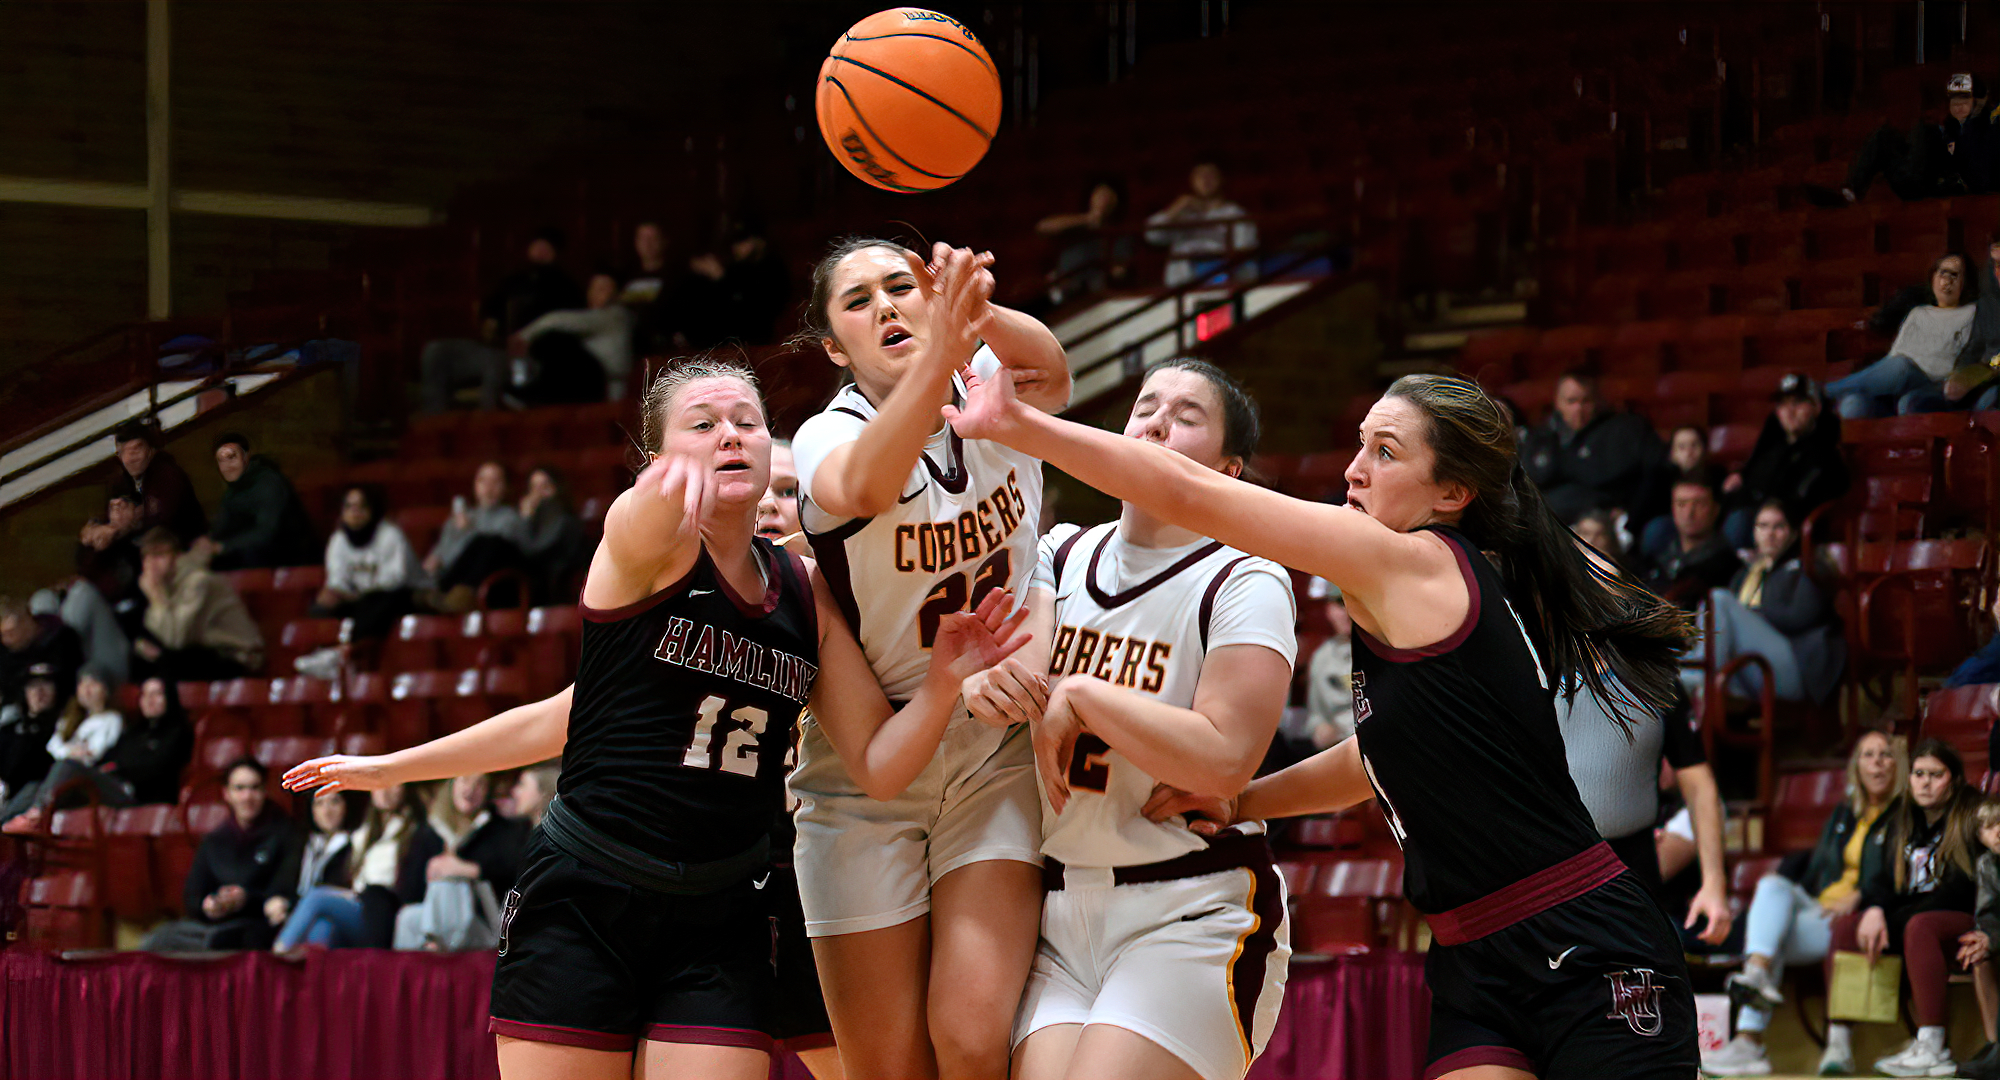 Makayla Anderson (#22) led Concordia with 18 points and four rebounds in their game at Hamline.